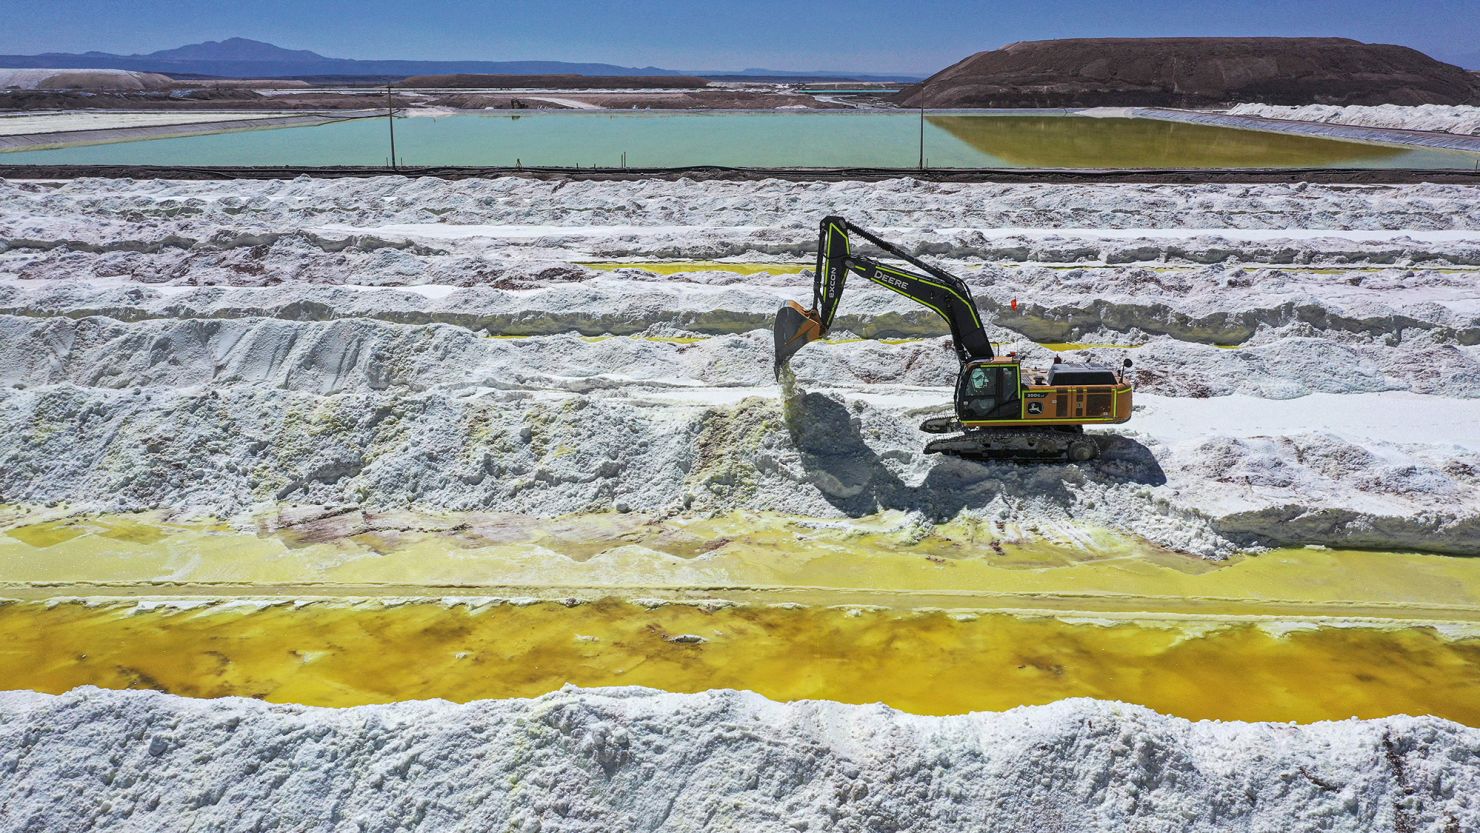 The lithium mine of the Chilean company Sociedad Quimica Minera in the Atacama Desert, Chile, seen in September 2022.